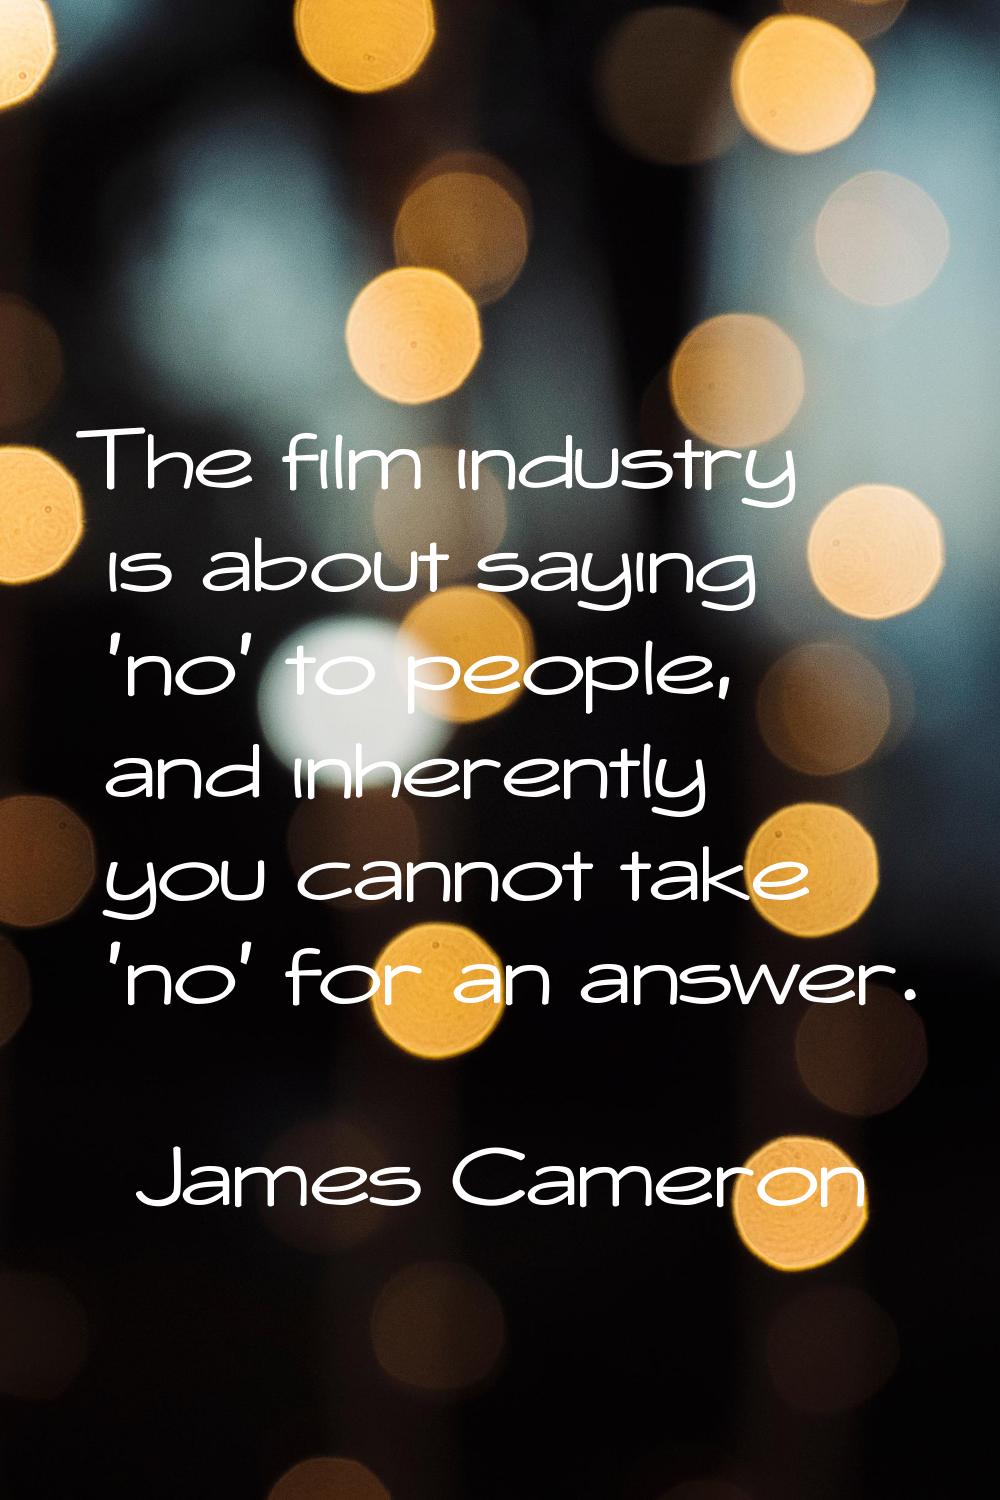 The film industry is about saying 'no' to people, and inherently you cannot take 'no' for an answer